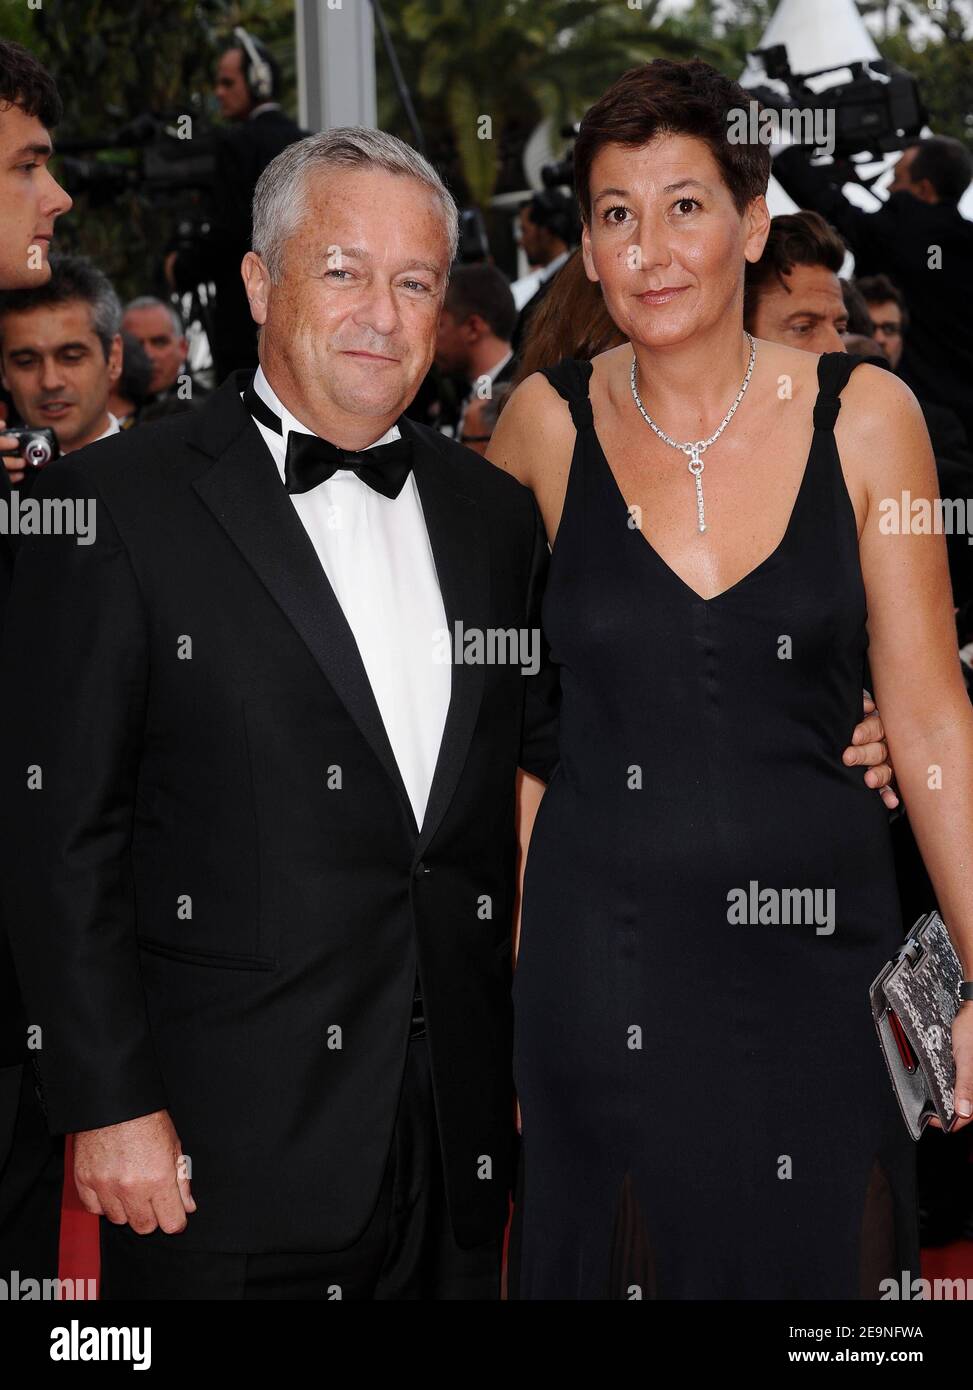 Jean-Marie Messier and wife arriving for the screening of 'Sleeping Beauty'  presented in competition in the Feature Films section as part of the 64th  Cannes International Film Festival, at the Palais des